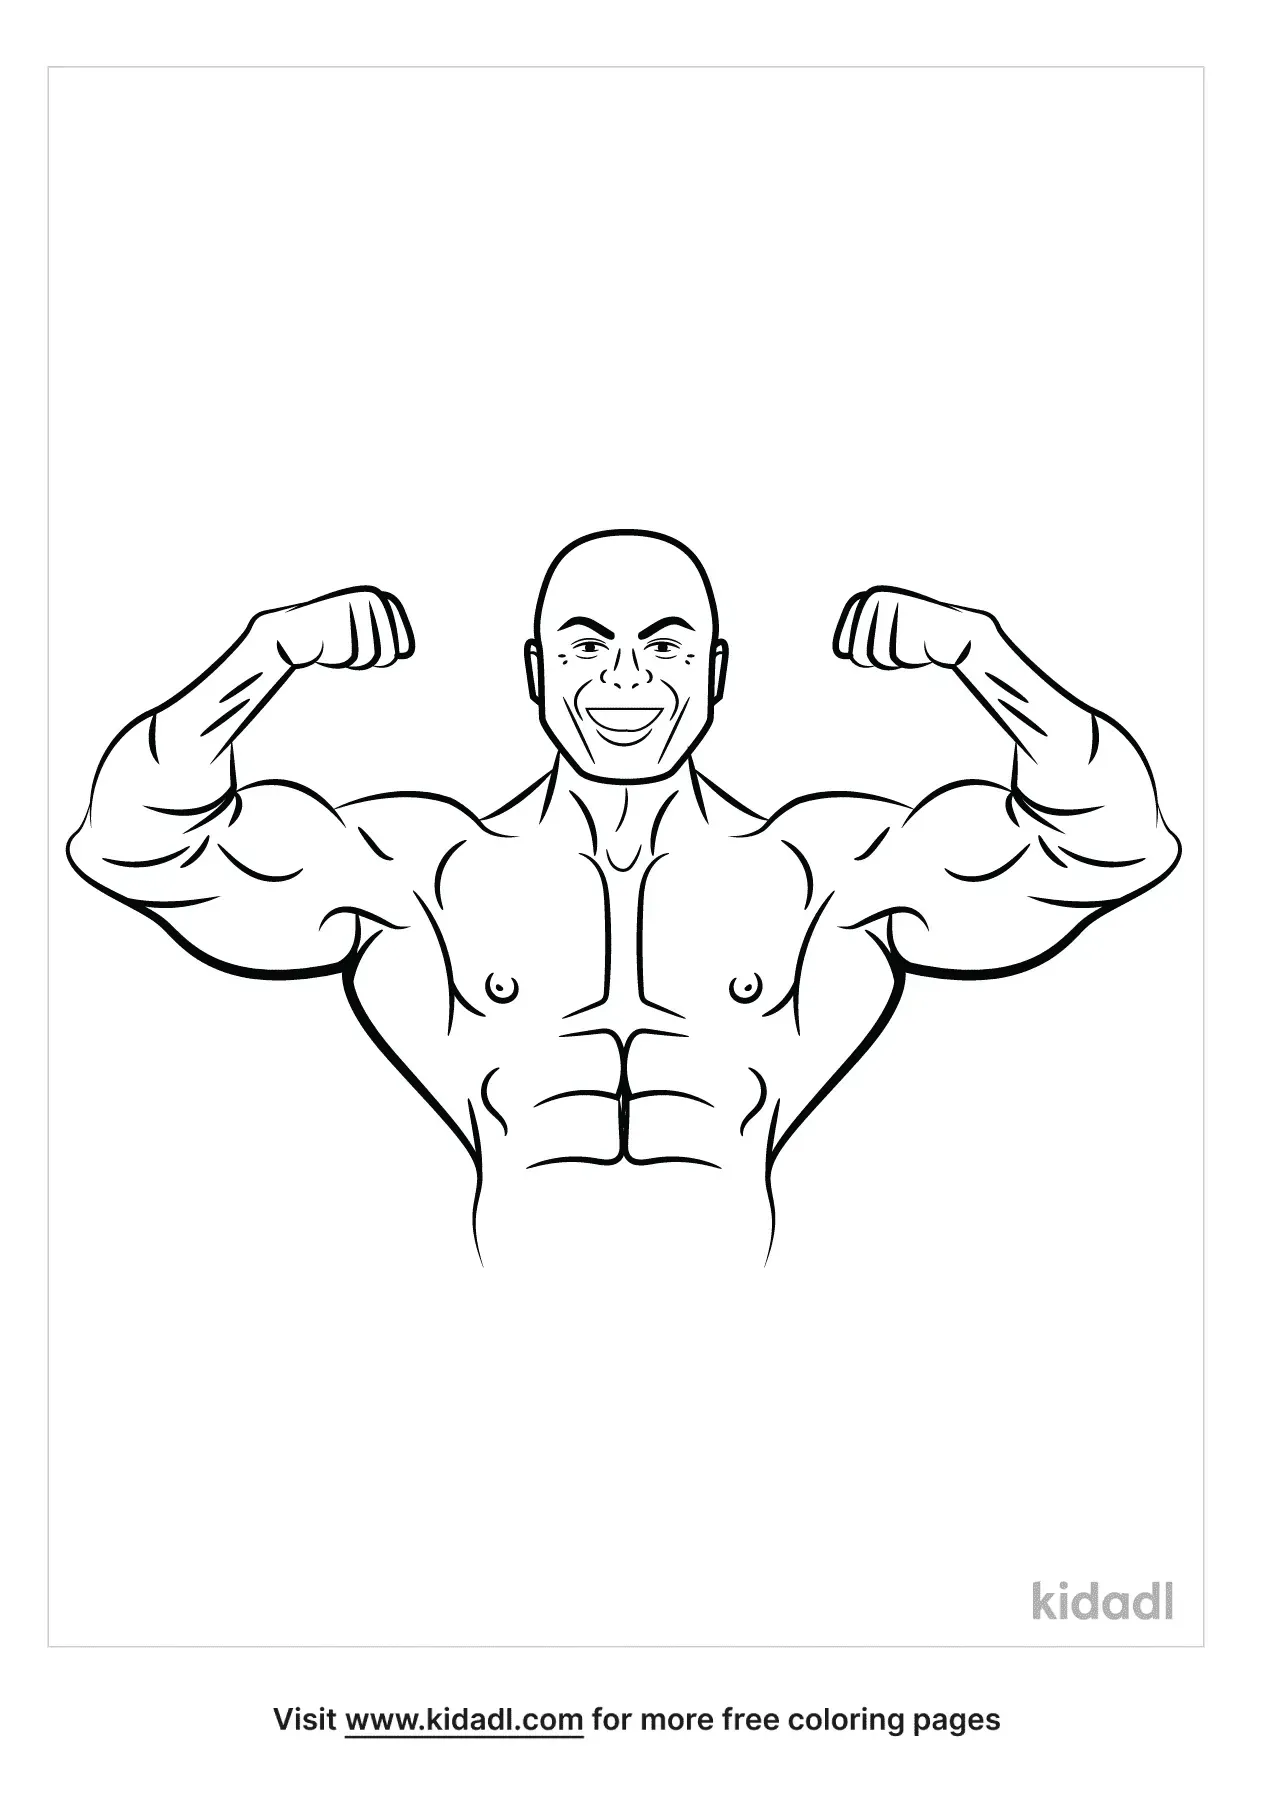 Free Flexed Muscle Coloring Page | Coloring Page Printables | Kidadl